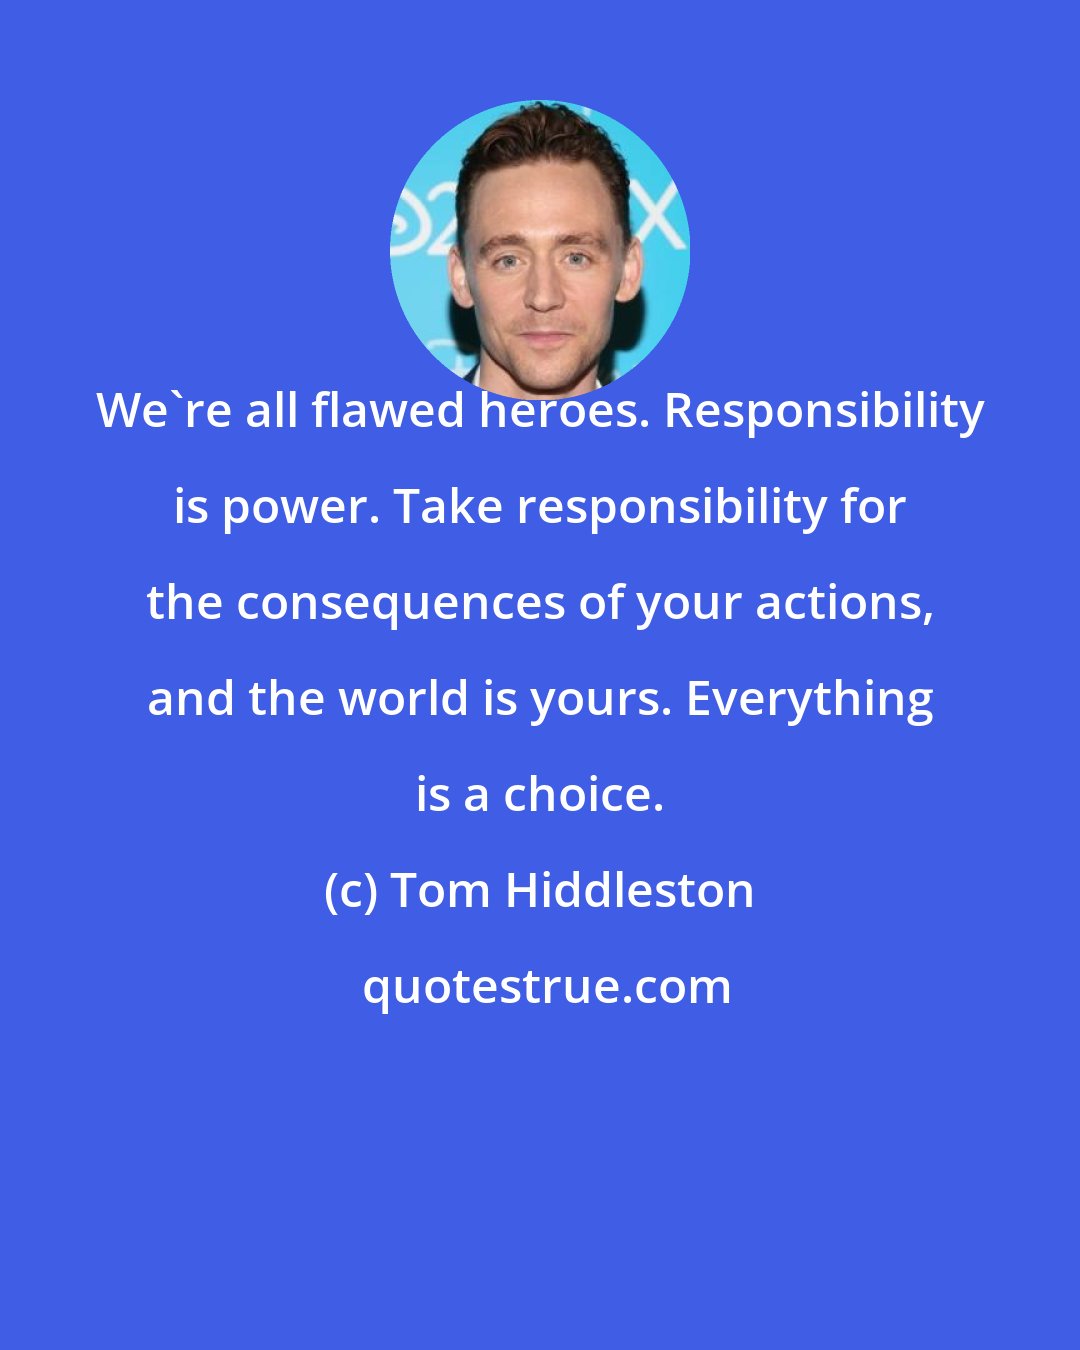 Tom Hiddleston: We're all flawed heroes. Responsibility is power. Take responsibility for the consequences of your actions, and the world is yours. Everything is a choice.